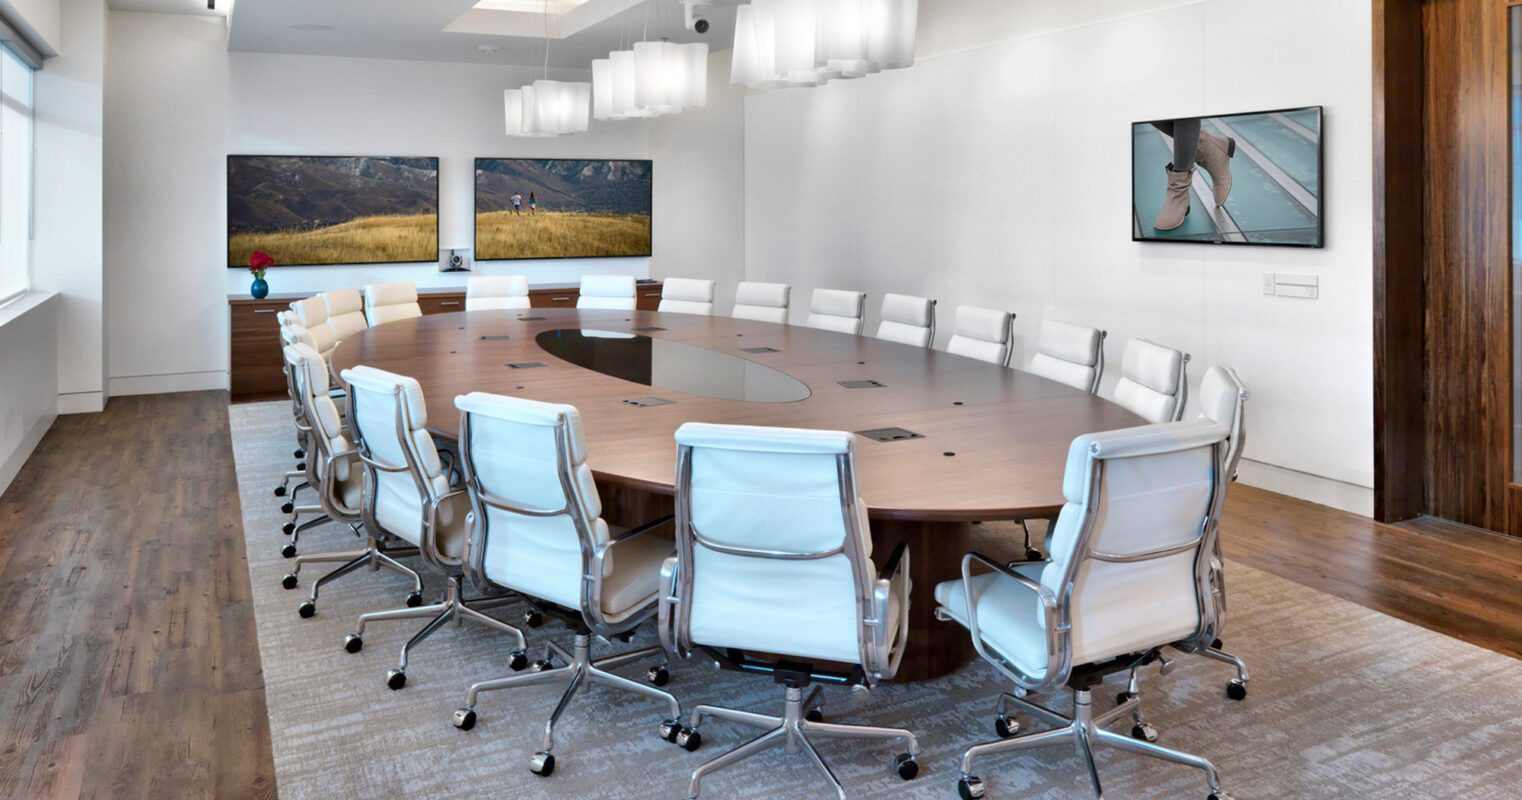 Elegantly appointed conference room featuring a large oval wooden table surrounded by white leather rolling chairs, complemented by a textured neutral carpet. Linear suspension lighting illuminates the space, with serene landscape artworks adorning the walls, all enclosed by warm-toned wooden paneling.